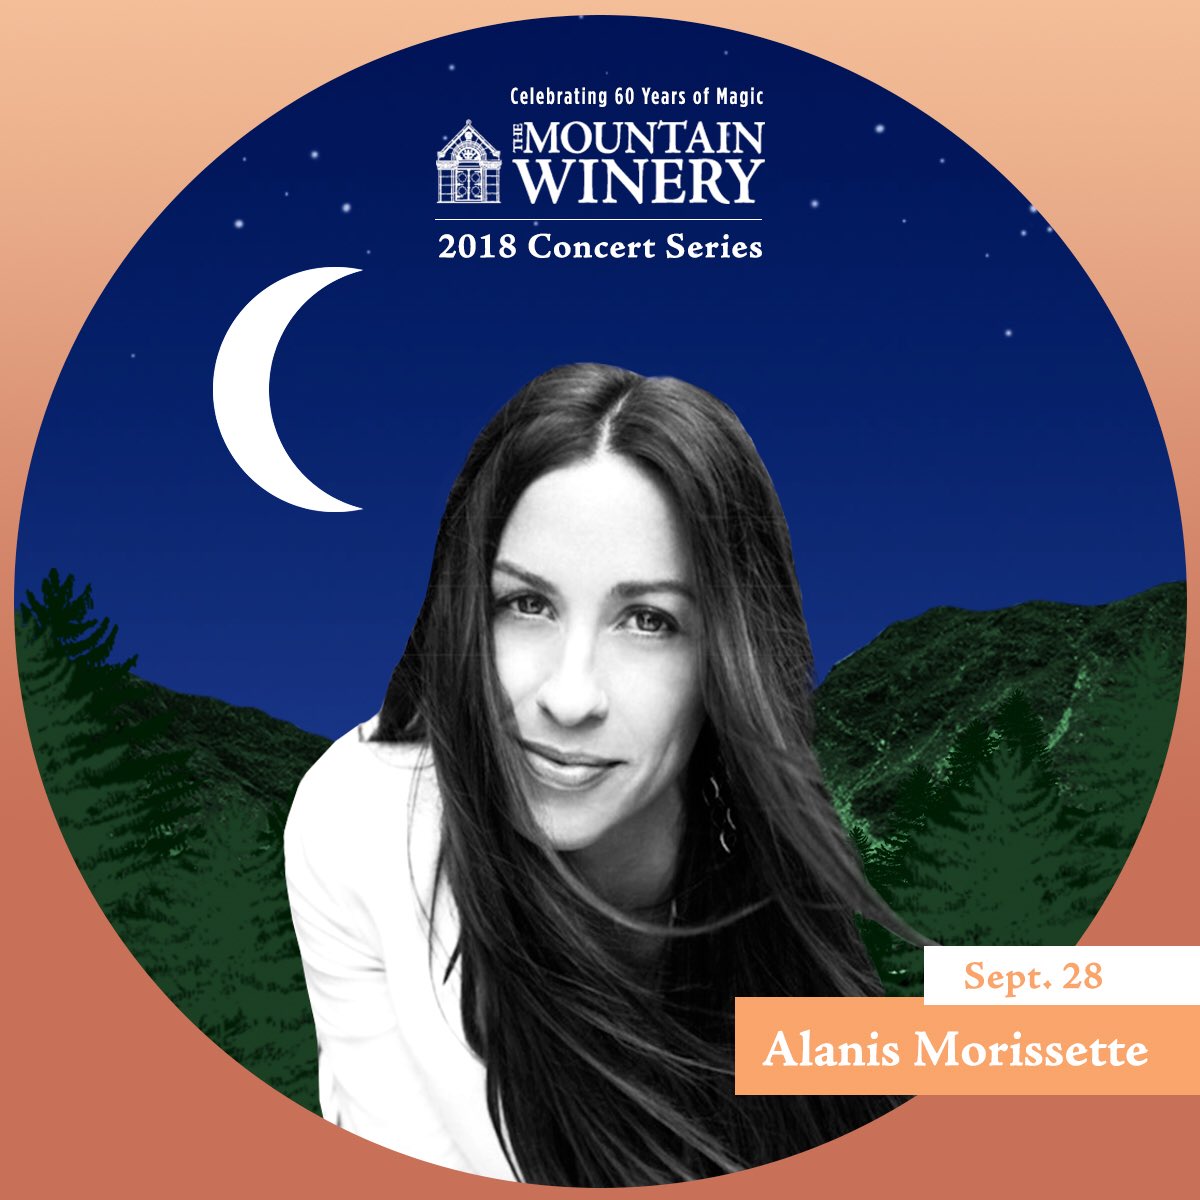 Alanis will be playing at @MountainWinery on September 28th. Get tickets here: https://t.co/LawgnQYc4Y https://t.co/rzgaF8kaEX